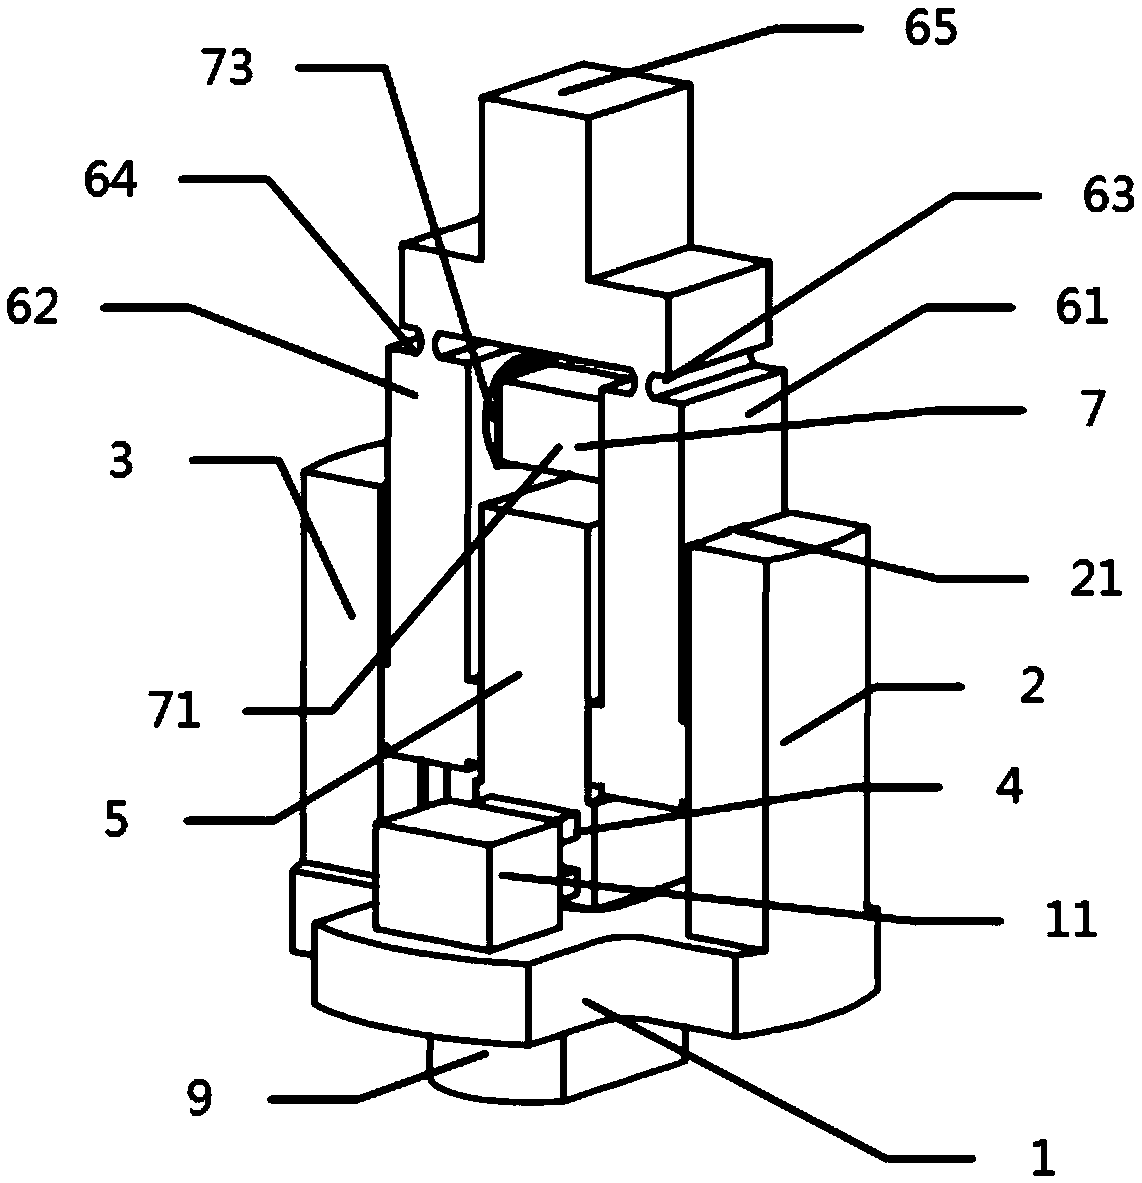 Stepping actuator device driven by two piezoelectric ceramics and comprising E-type rail, and method